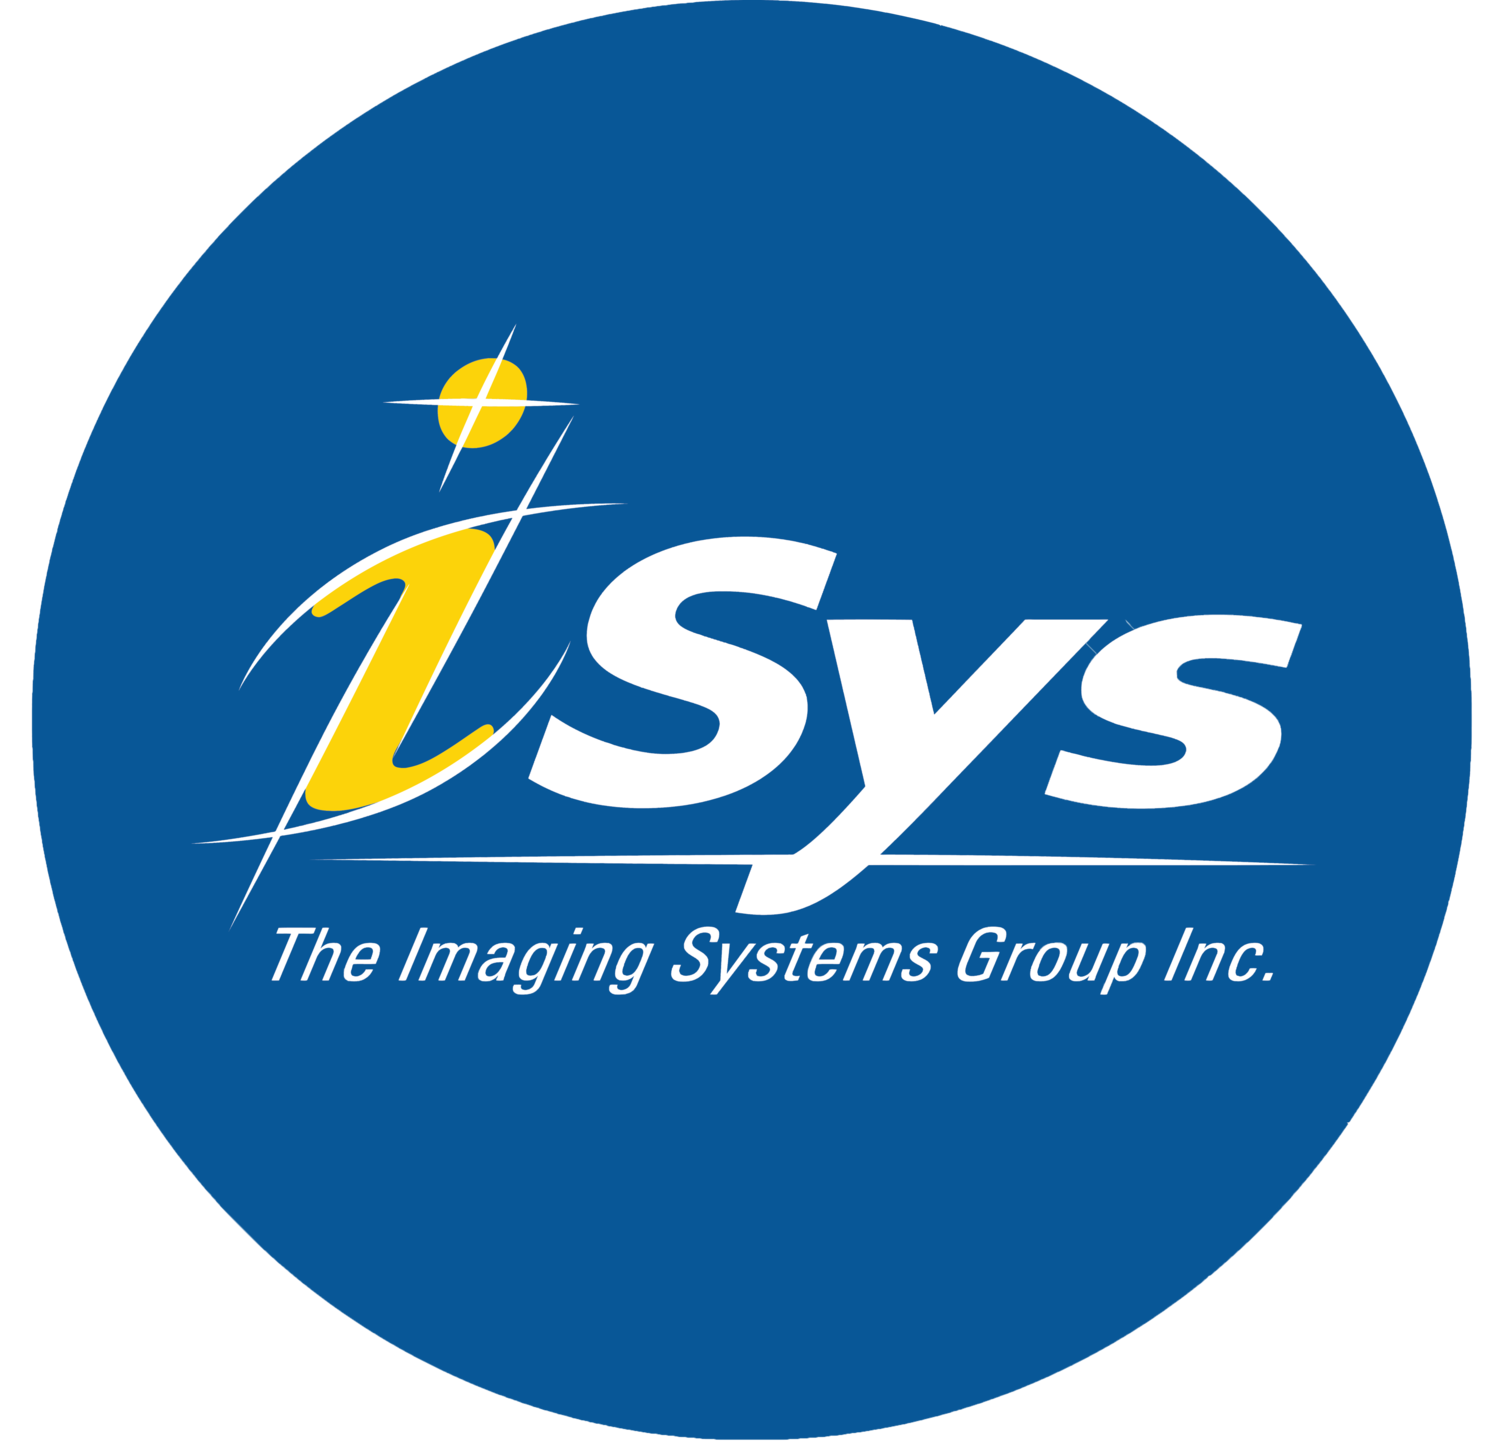 The Imaging Systems Group